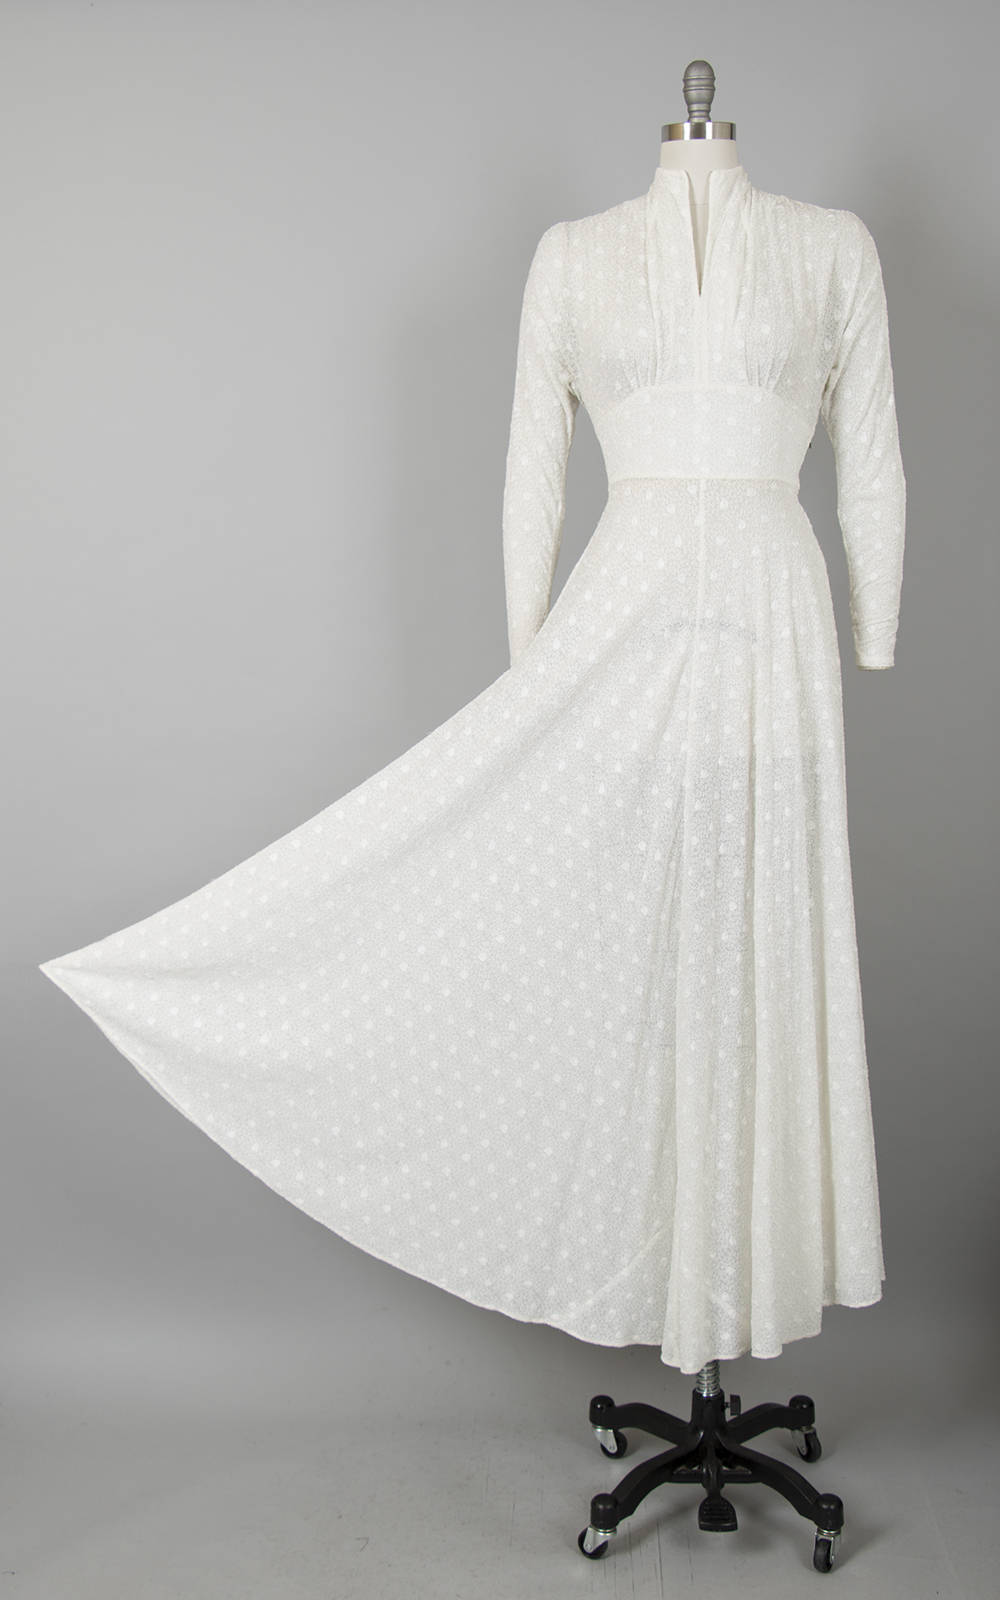 Vintage 1930s 1940s Wedding Dress 30s 40s Sheer White Chiffon Soutache Heart Embroidered Full Length Long Sleeve Bridal Gown (small/medium)